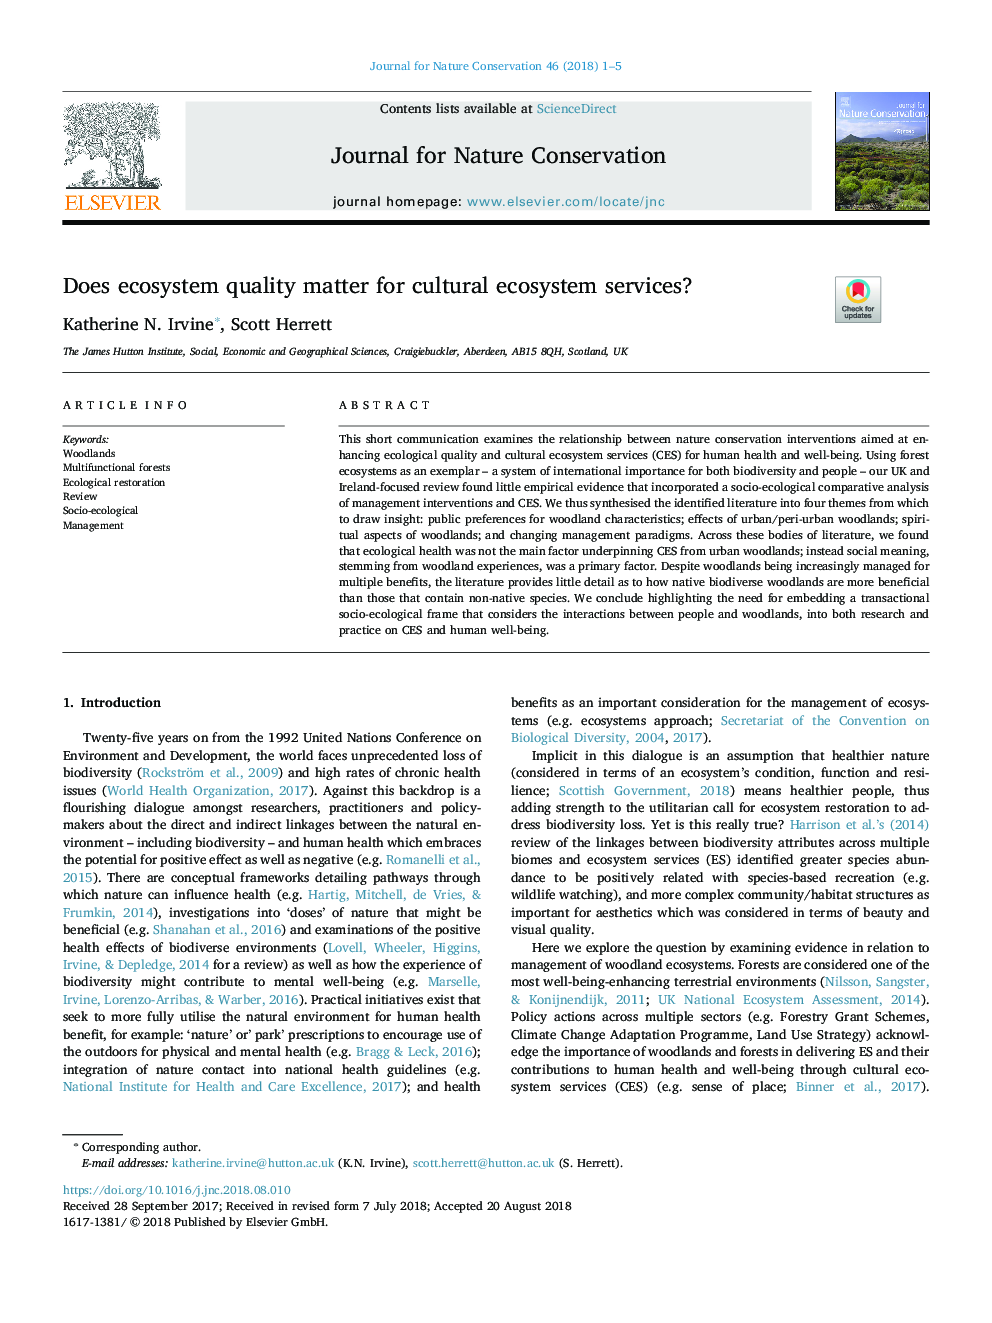 Does ecosystem quality matter for cultural ecosystem services?